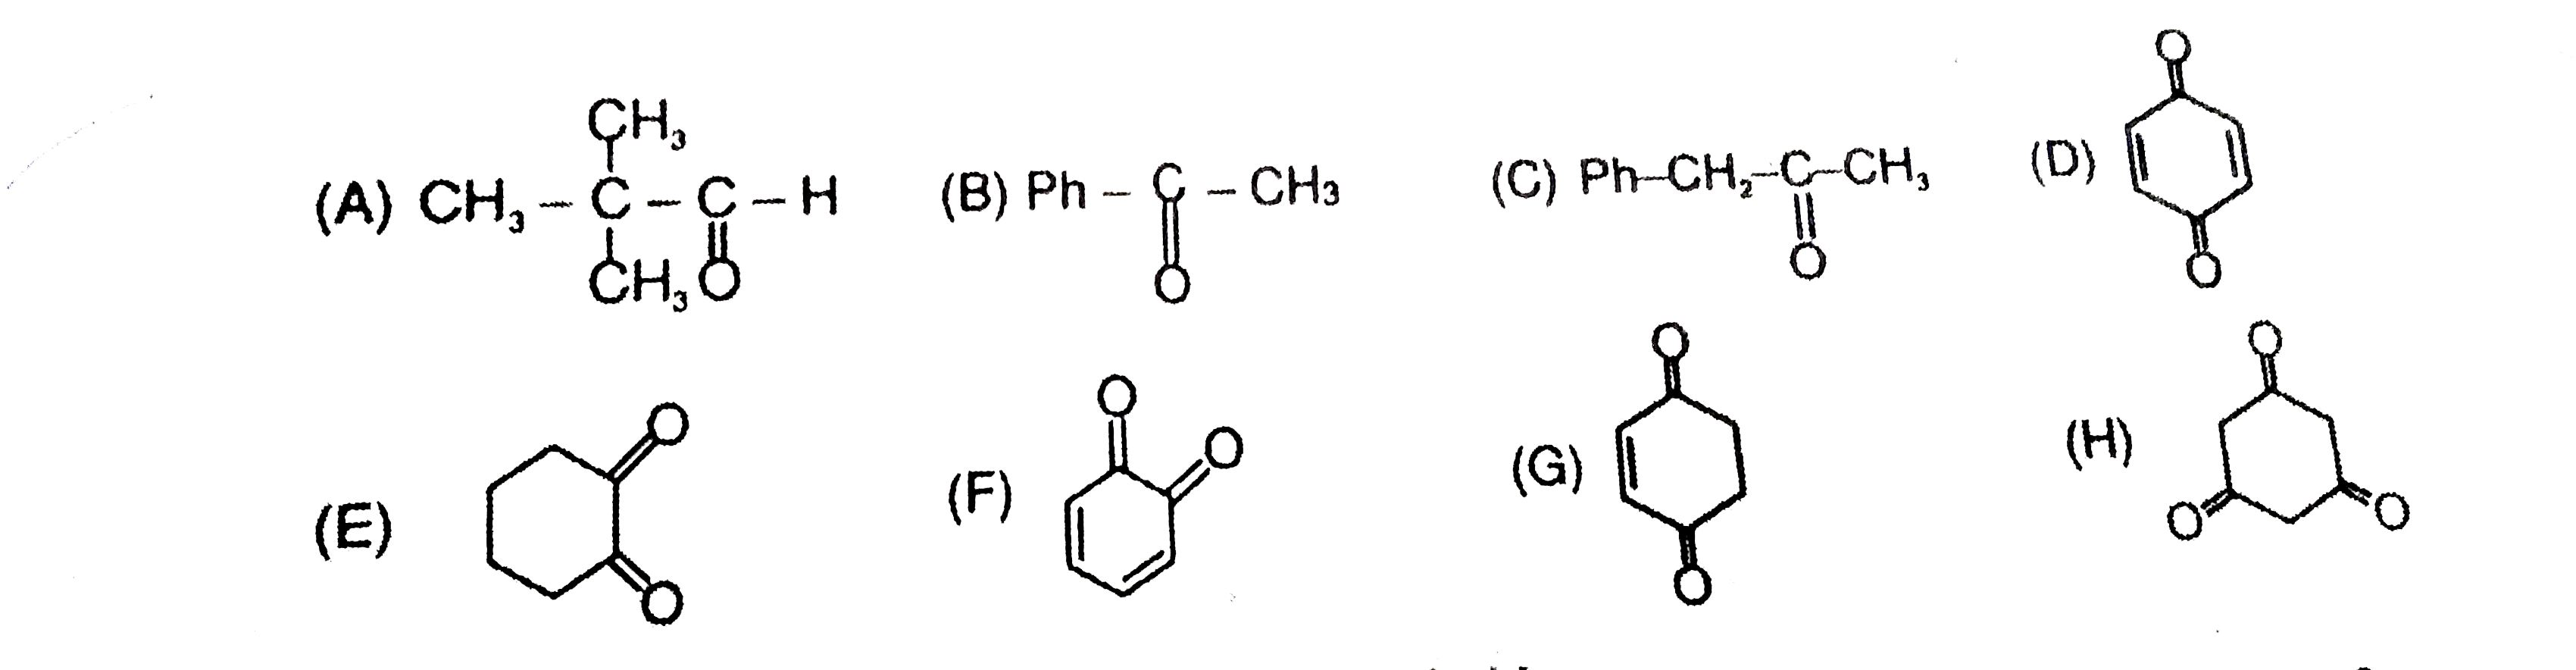 Which of the following compounds will exhibit tautomerism?